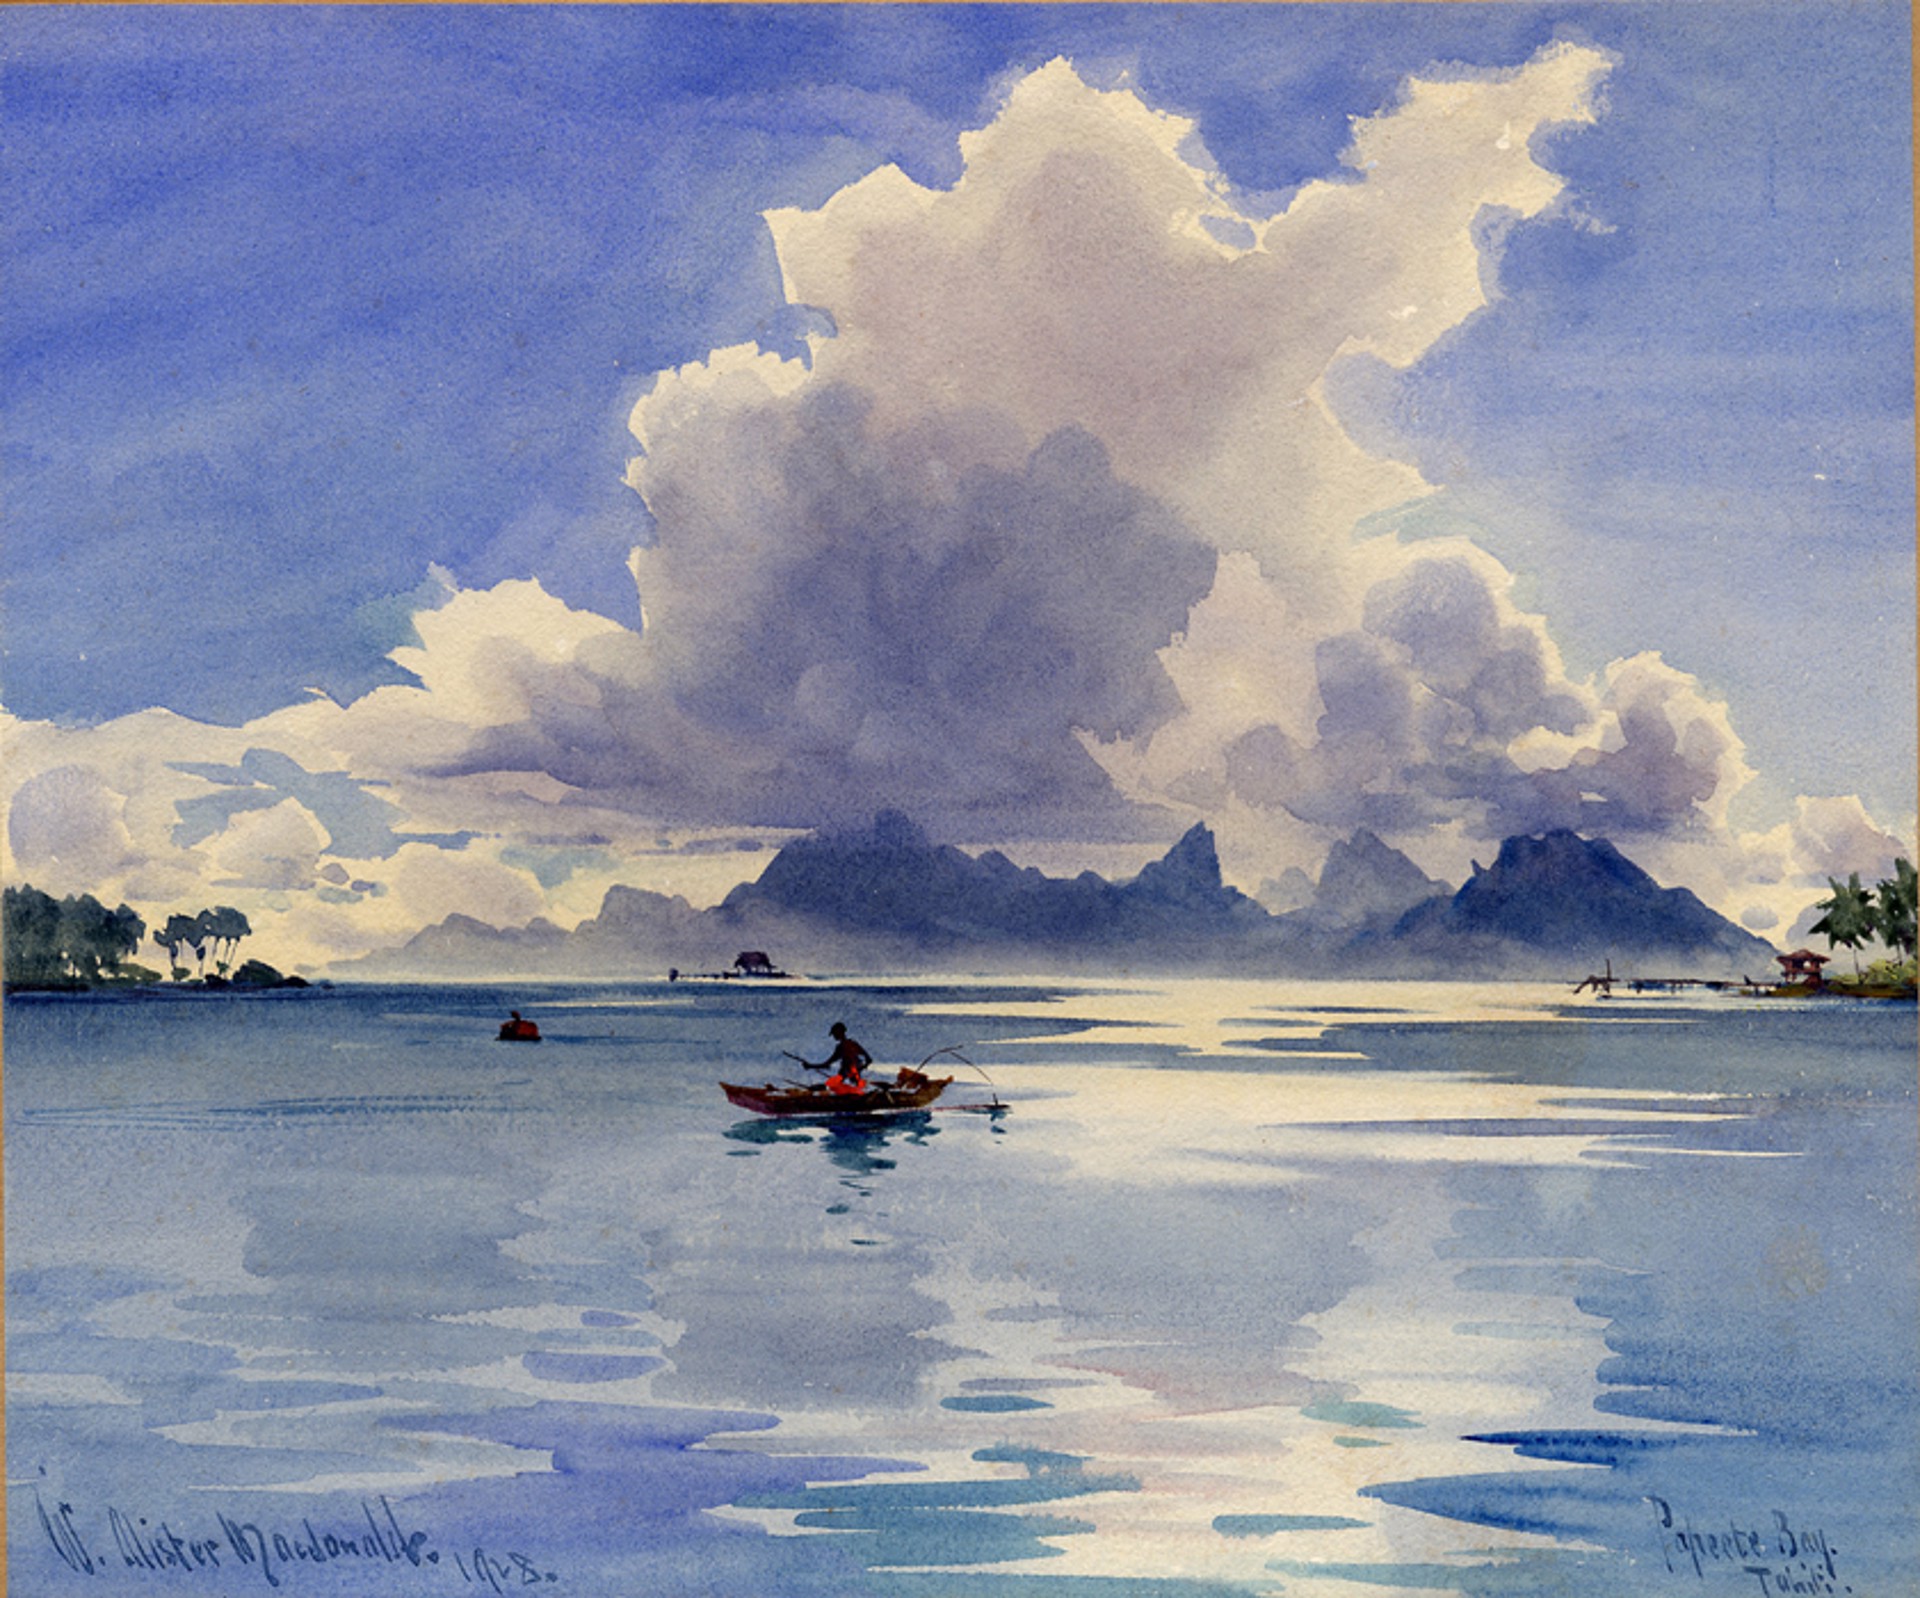 Cloud Effect over Island of Moorea from Papeete Bay by William A. MacDonald